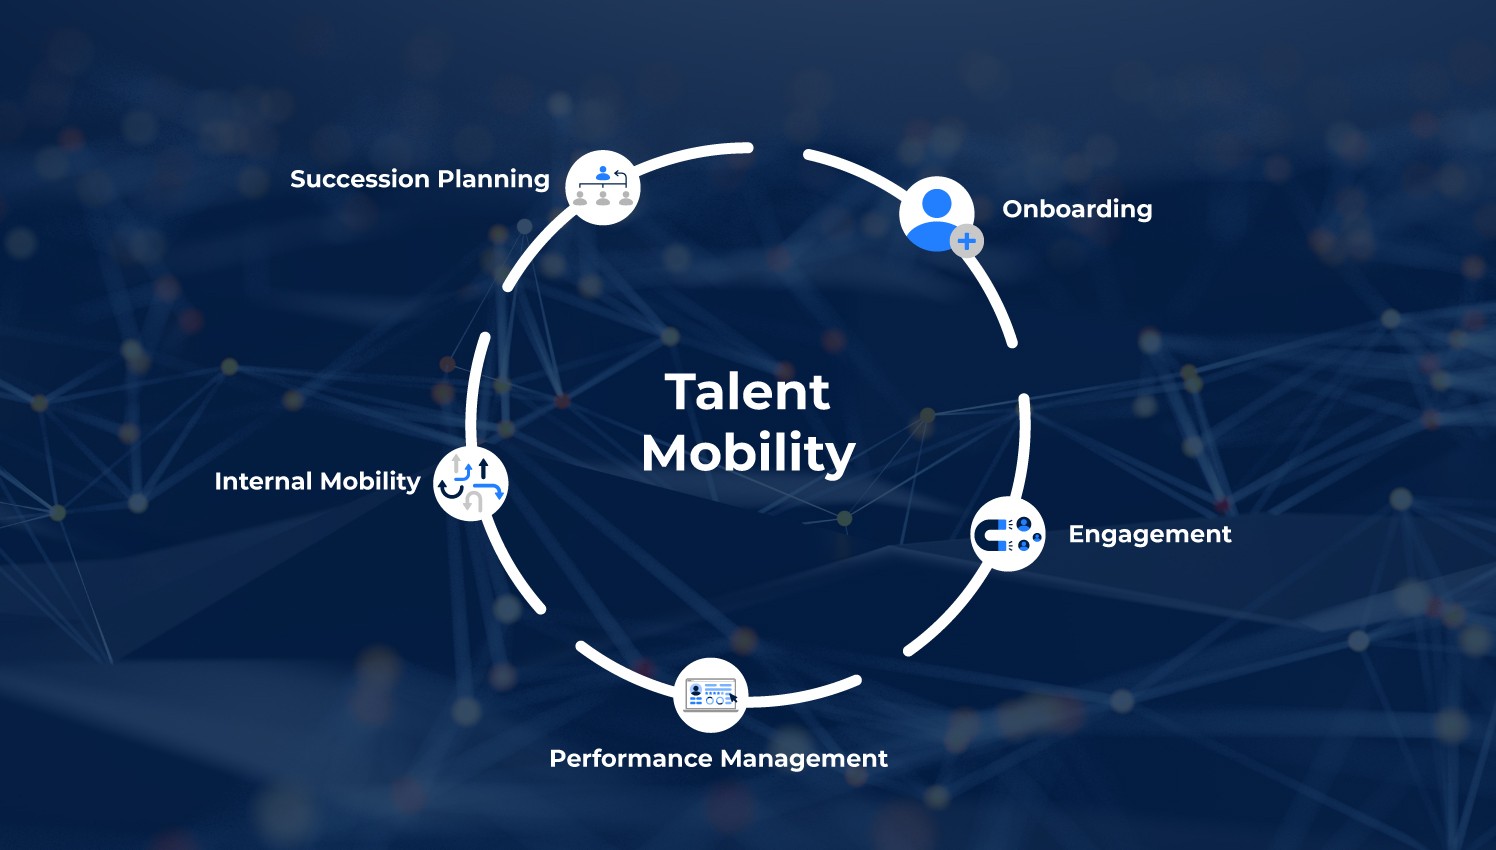 A graphic depicting various aspects of talent mobility, including internal mobility, succession planning, engagement and more.